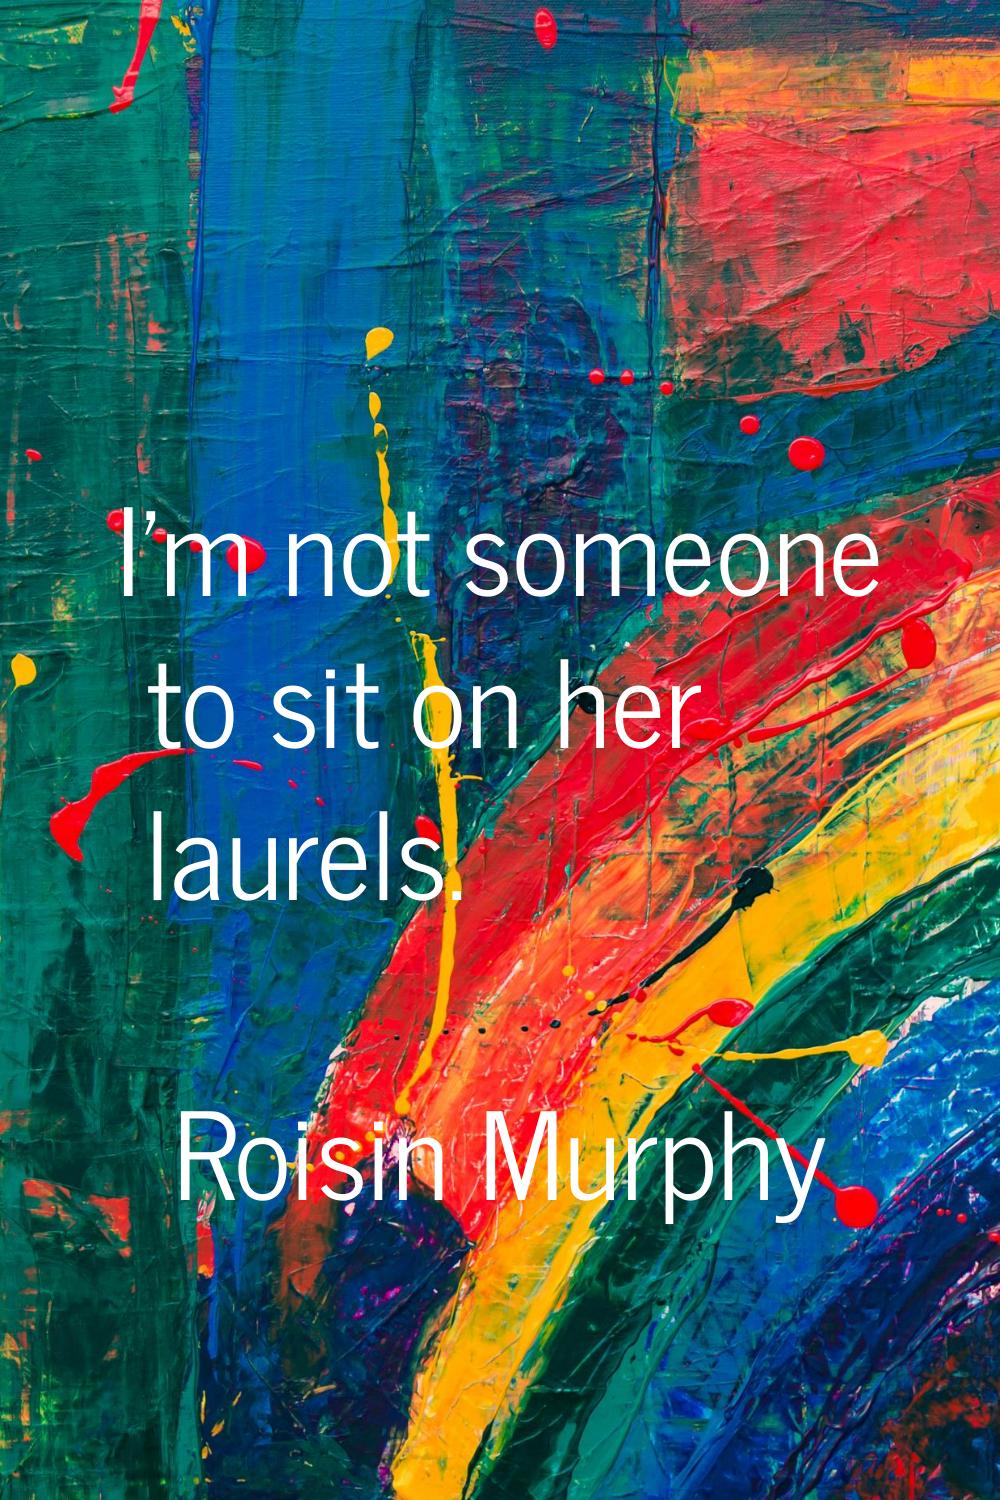 I'm not someone to sit on her laurels.